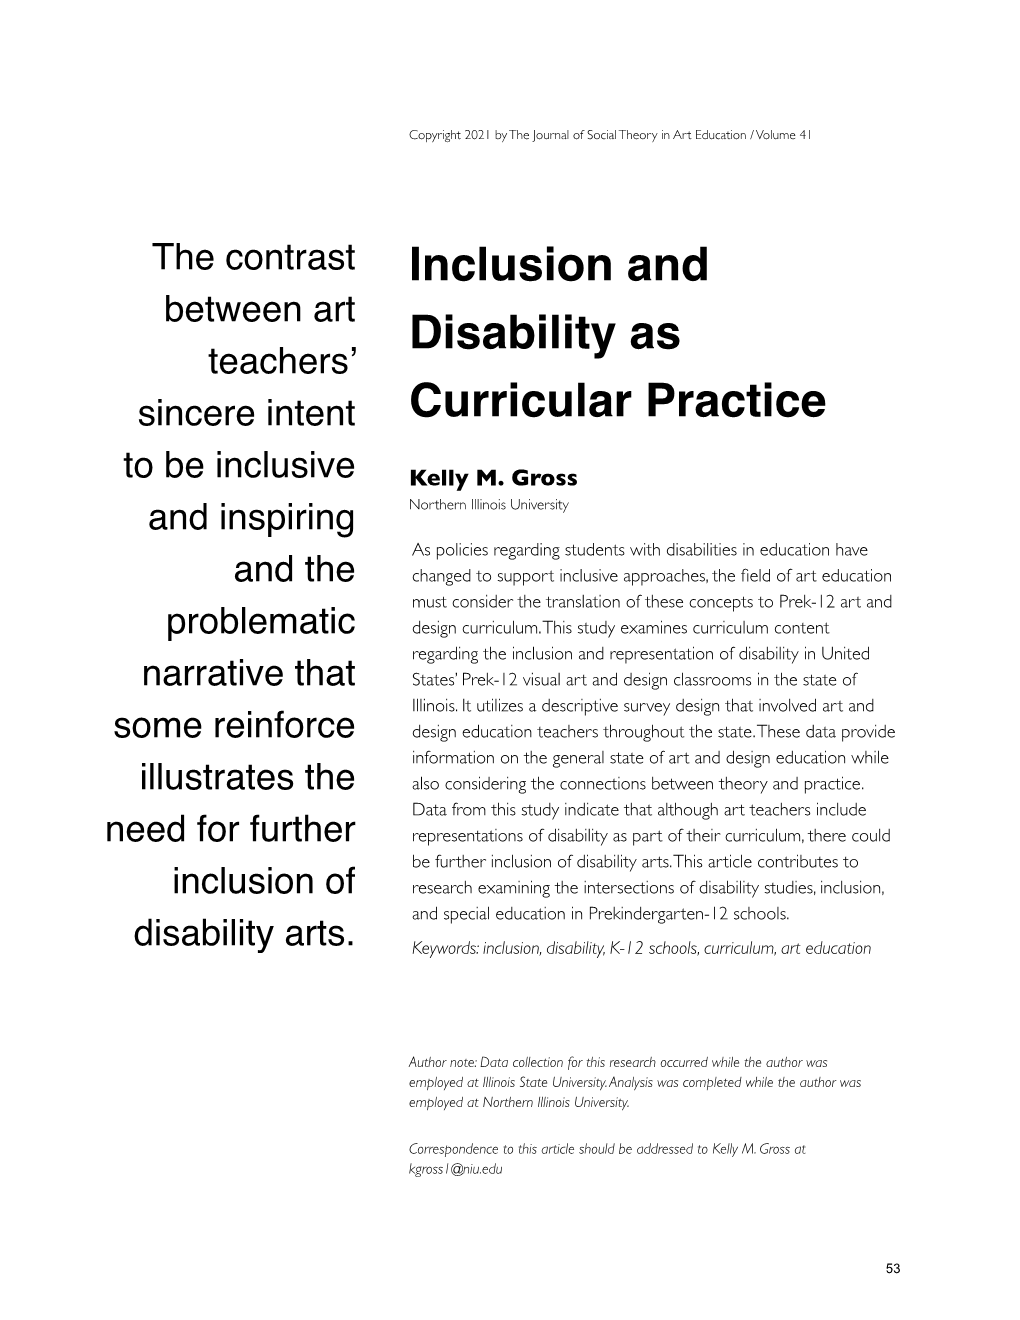 Inclusion and Disability As Curricular Practices the Journal of Social Theory in Art Education / Volume 41 (2021)